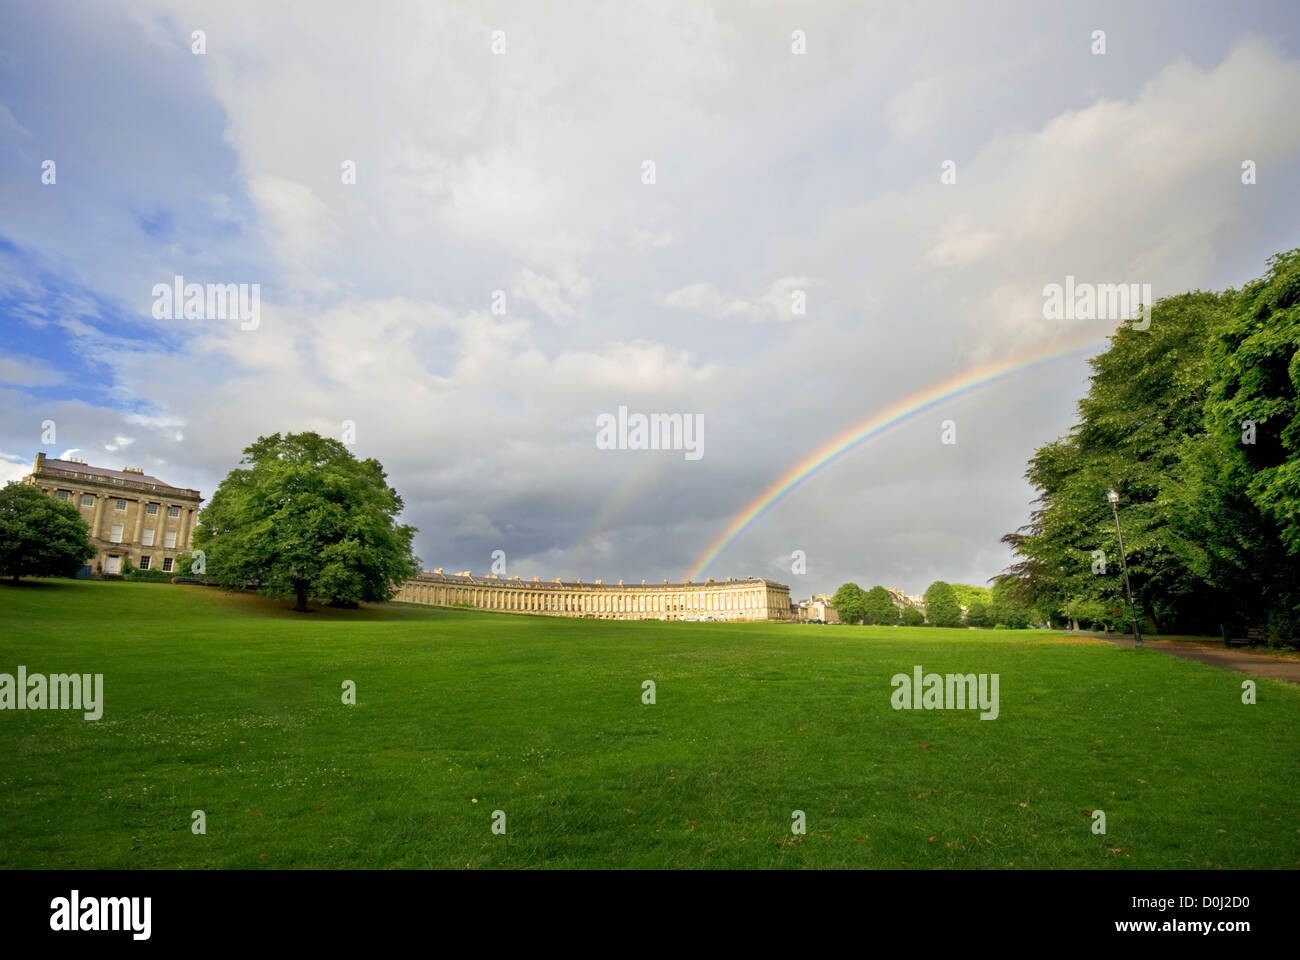 A view of the Royal Crescent in Bath with a rainbow overhead. Stock Photo